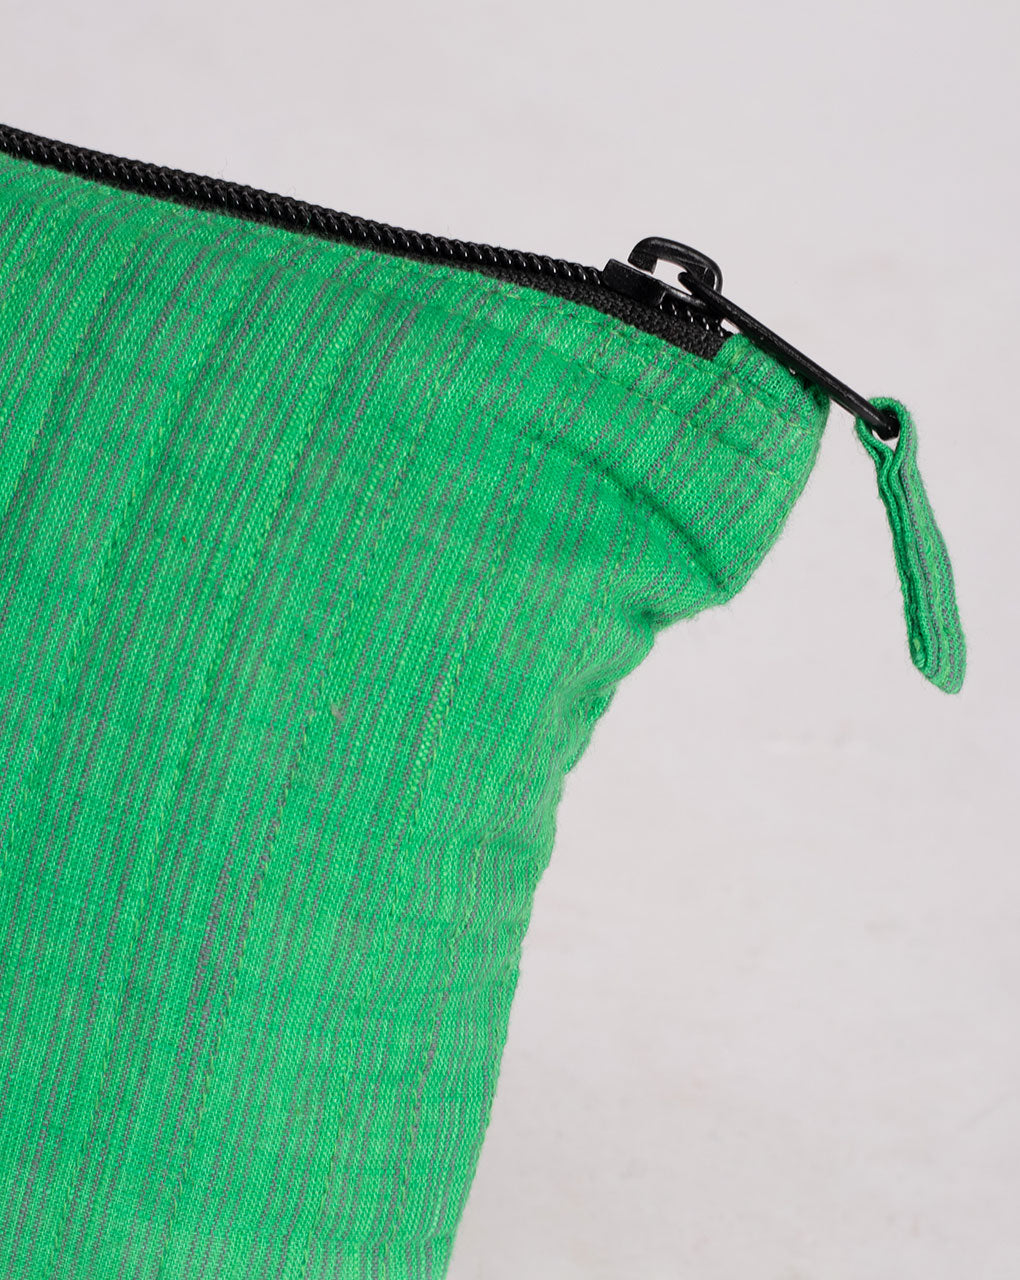 Upcycled Loom Textured Stripes Pouch - Fabriclore.com